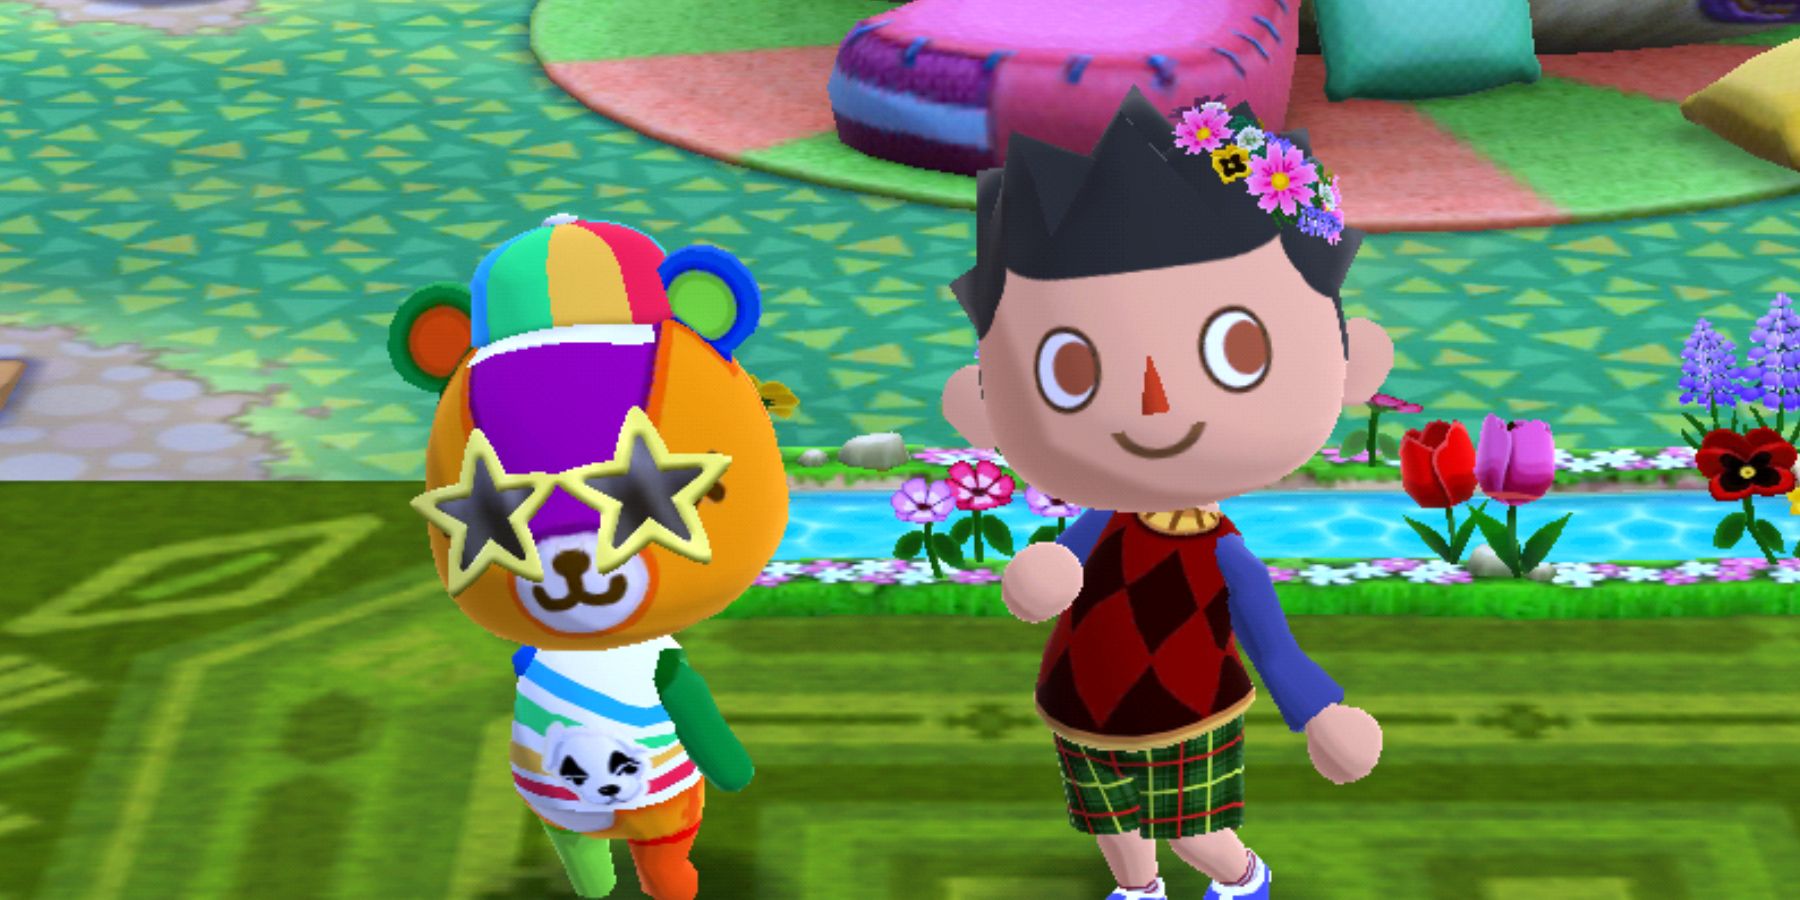 stitches-and-the-player-animal-crossing-pocket-camp